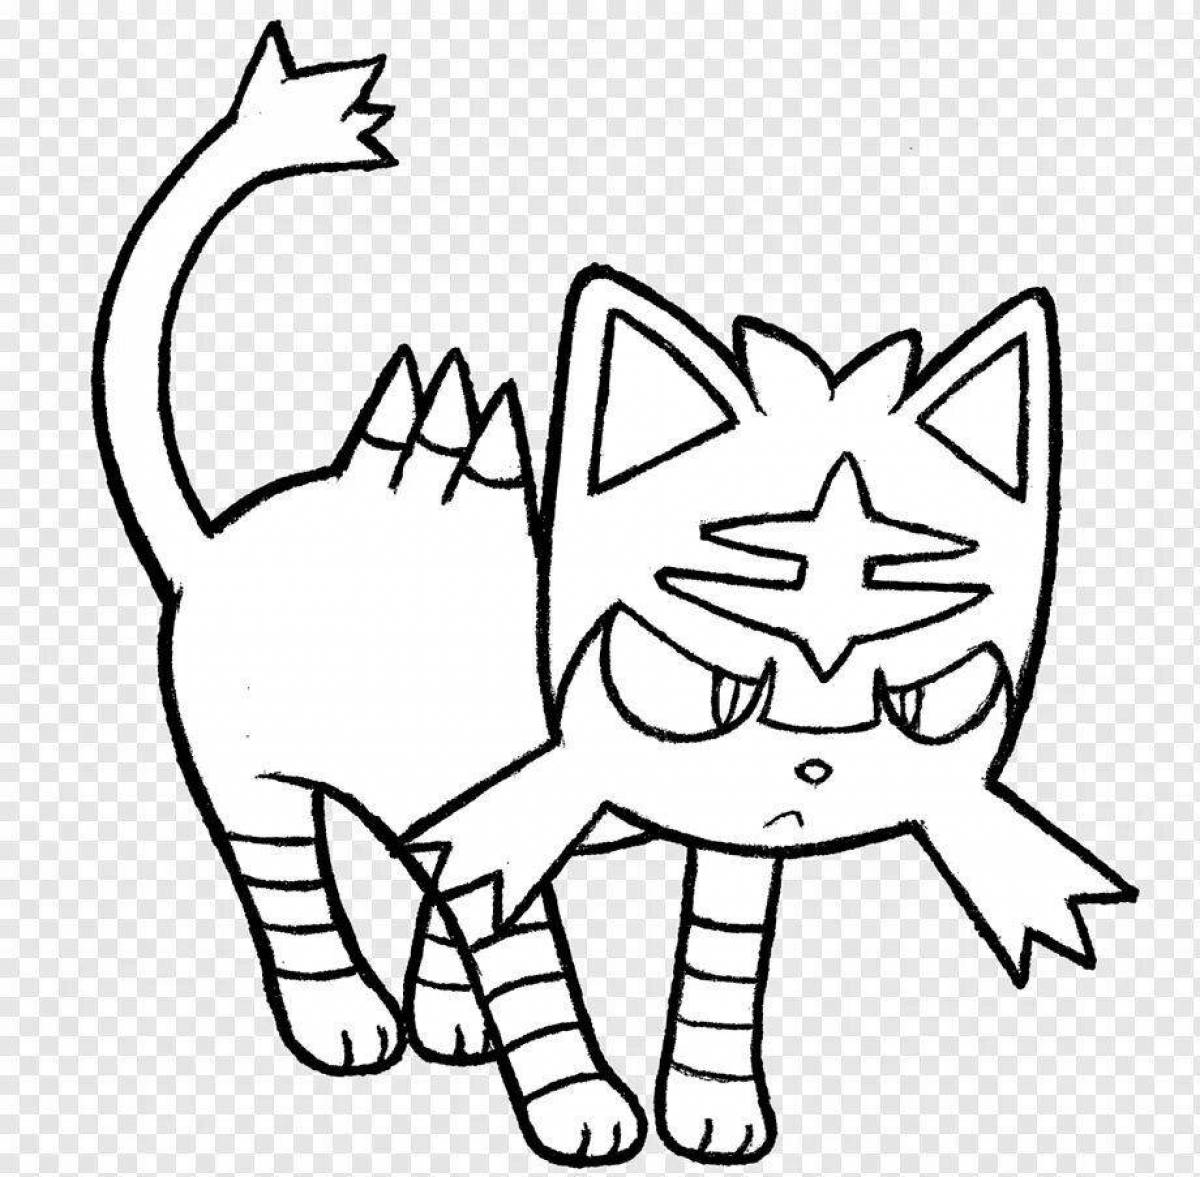 Adorable cat outline coloring page